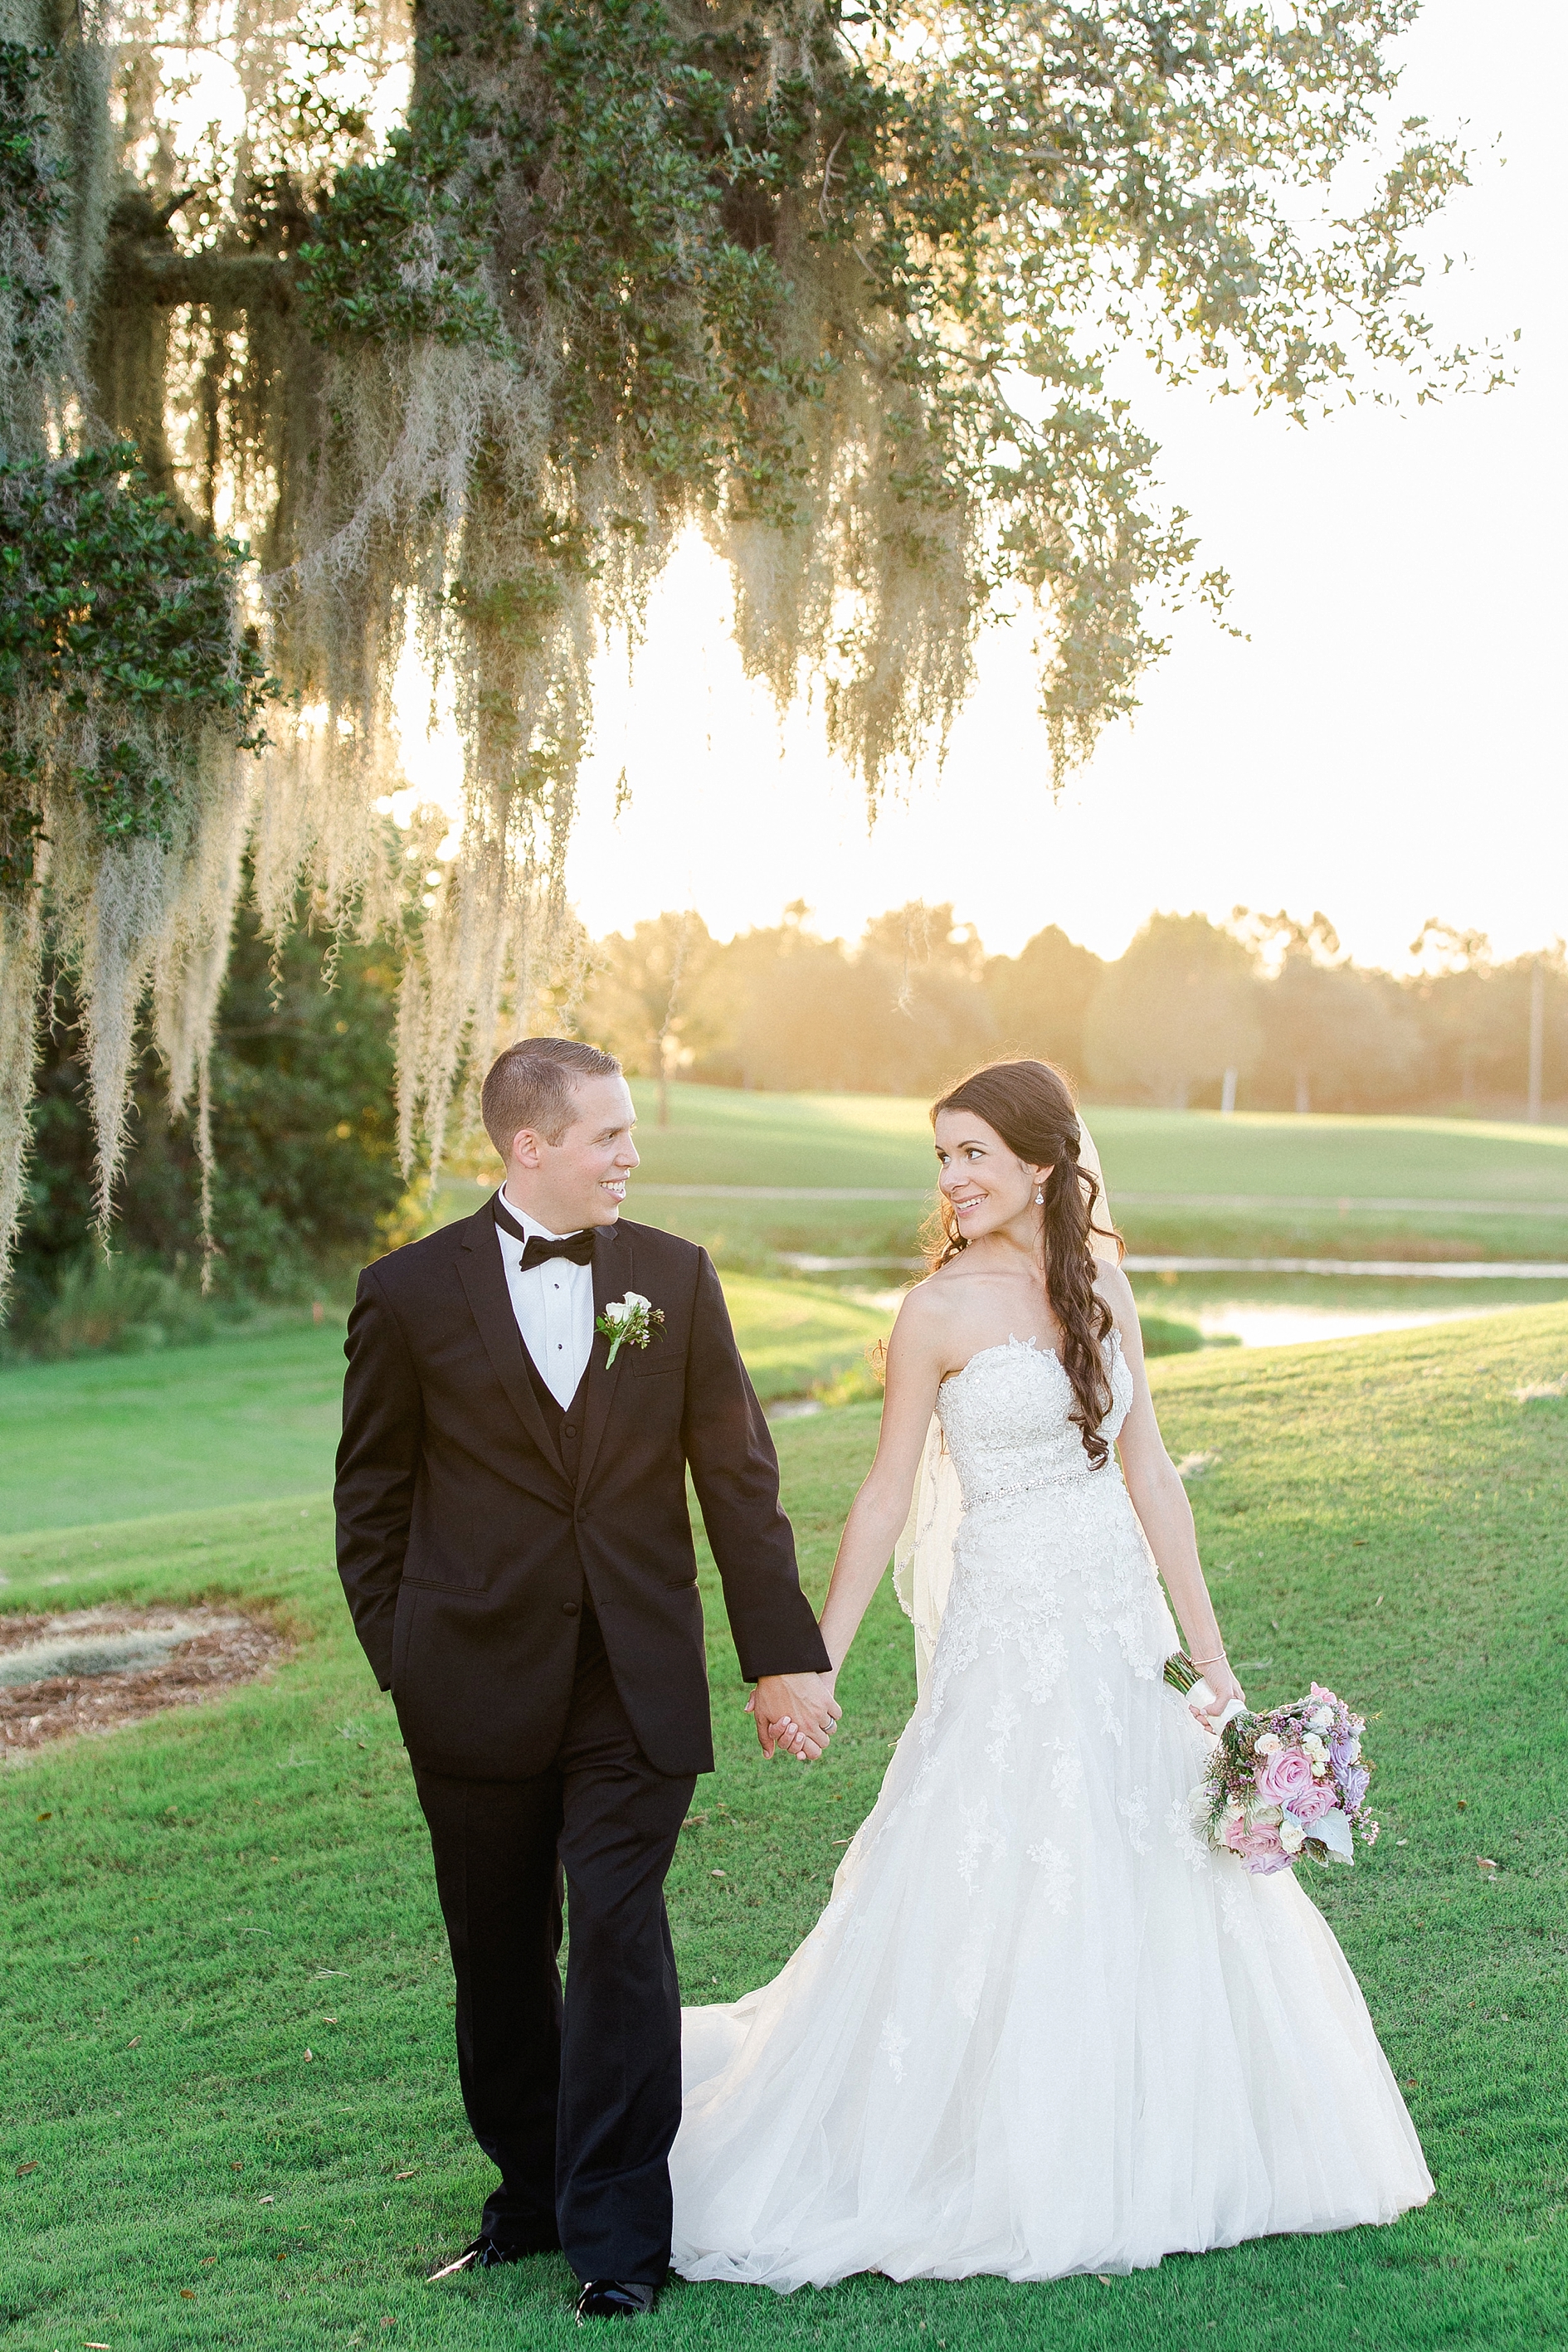 Lakewood Ranch Country Club Wedding | @ Ailyn La Torre Photography 2015